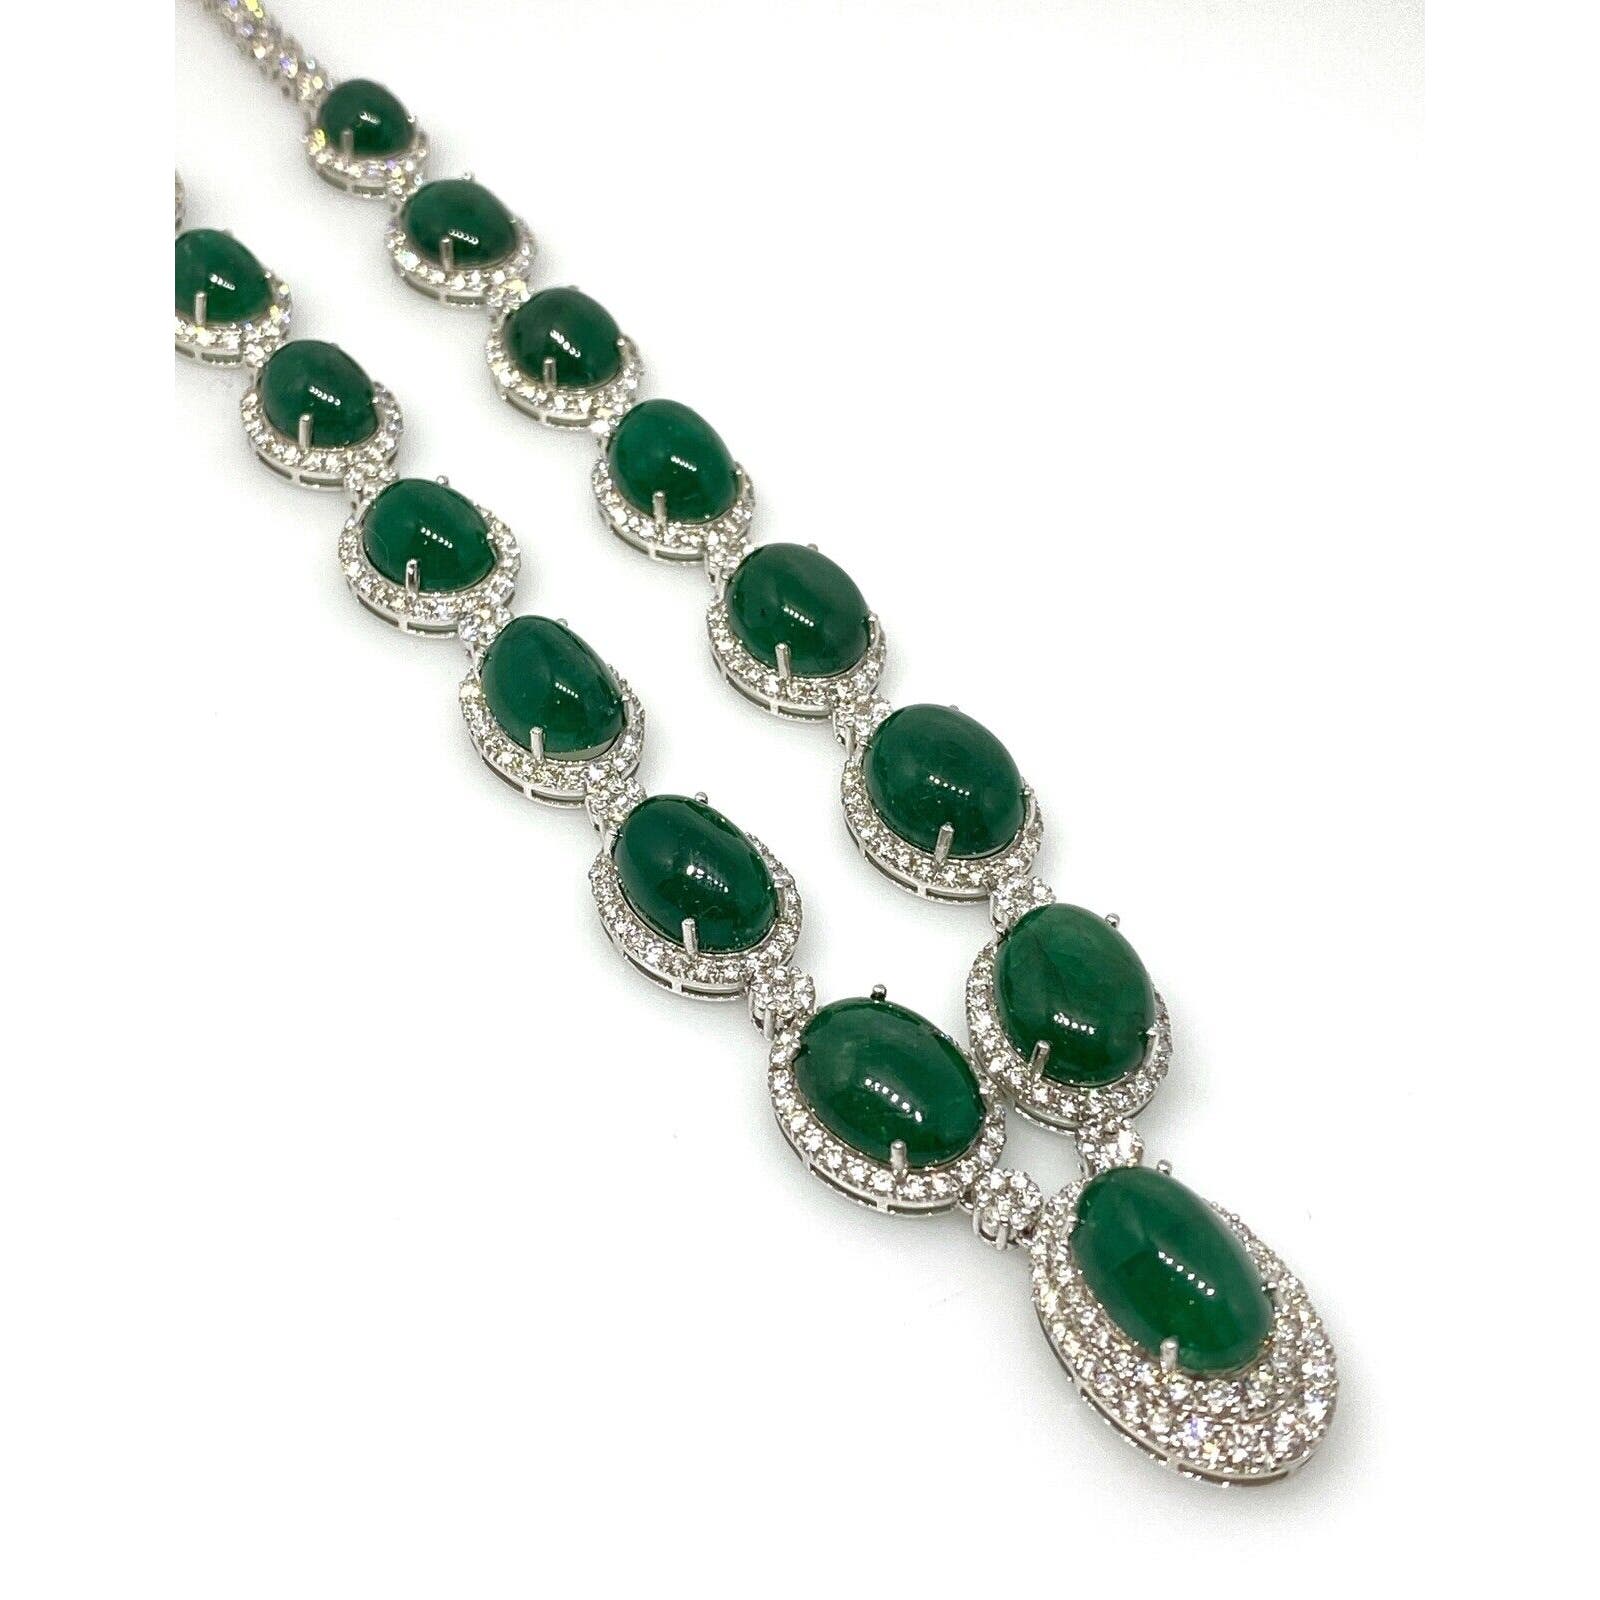 Cabochon Emerald and Diamond Necklace 100.00 cttw in 18k White Gold - HM2304AB